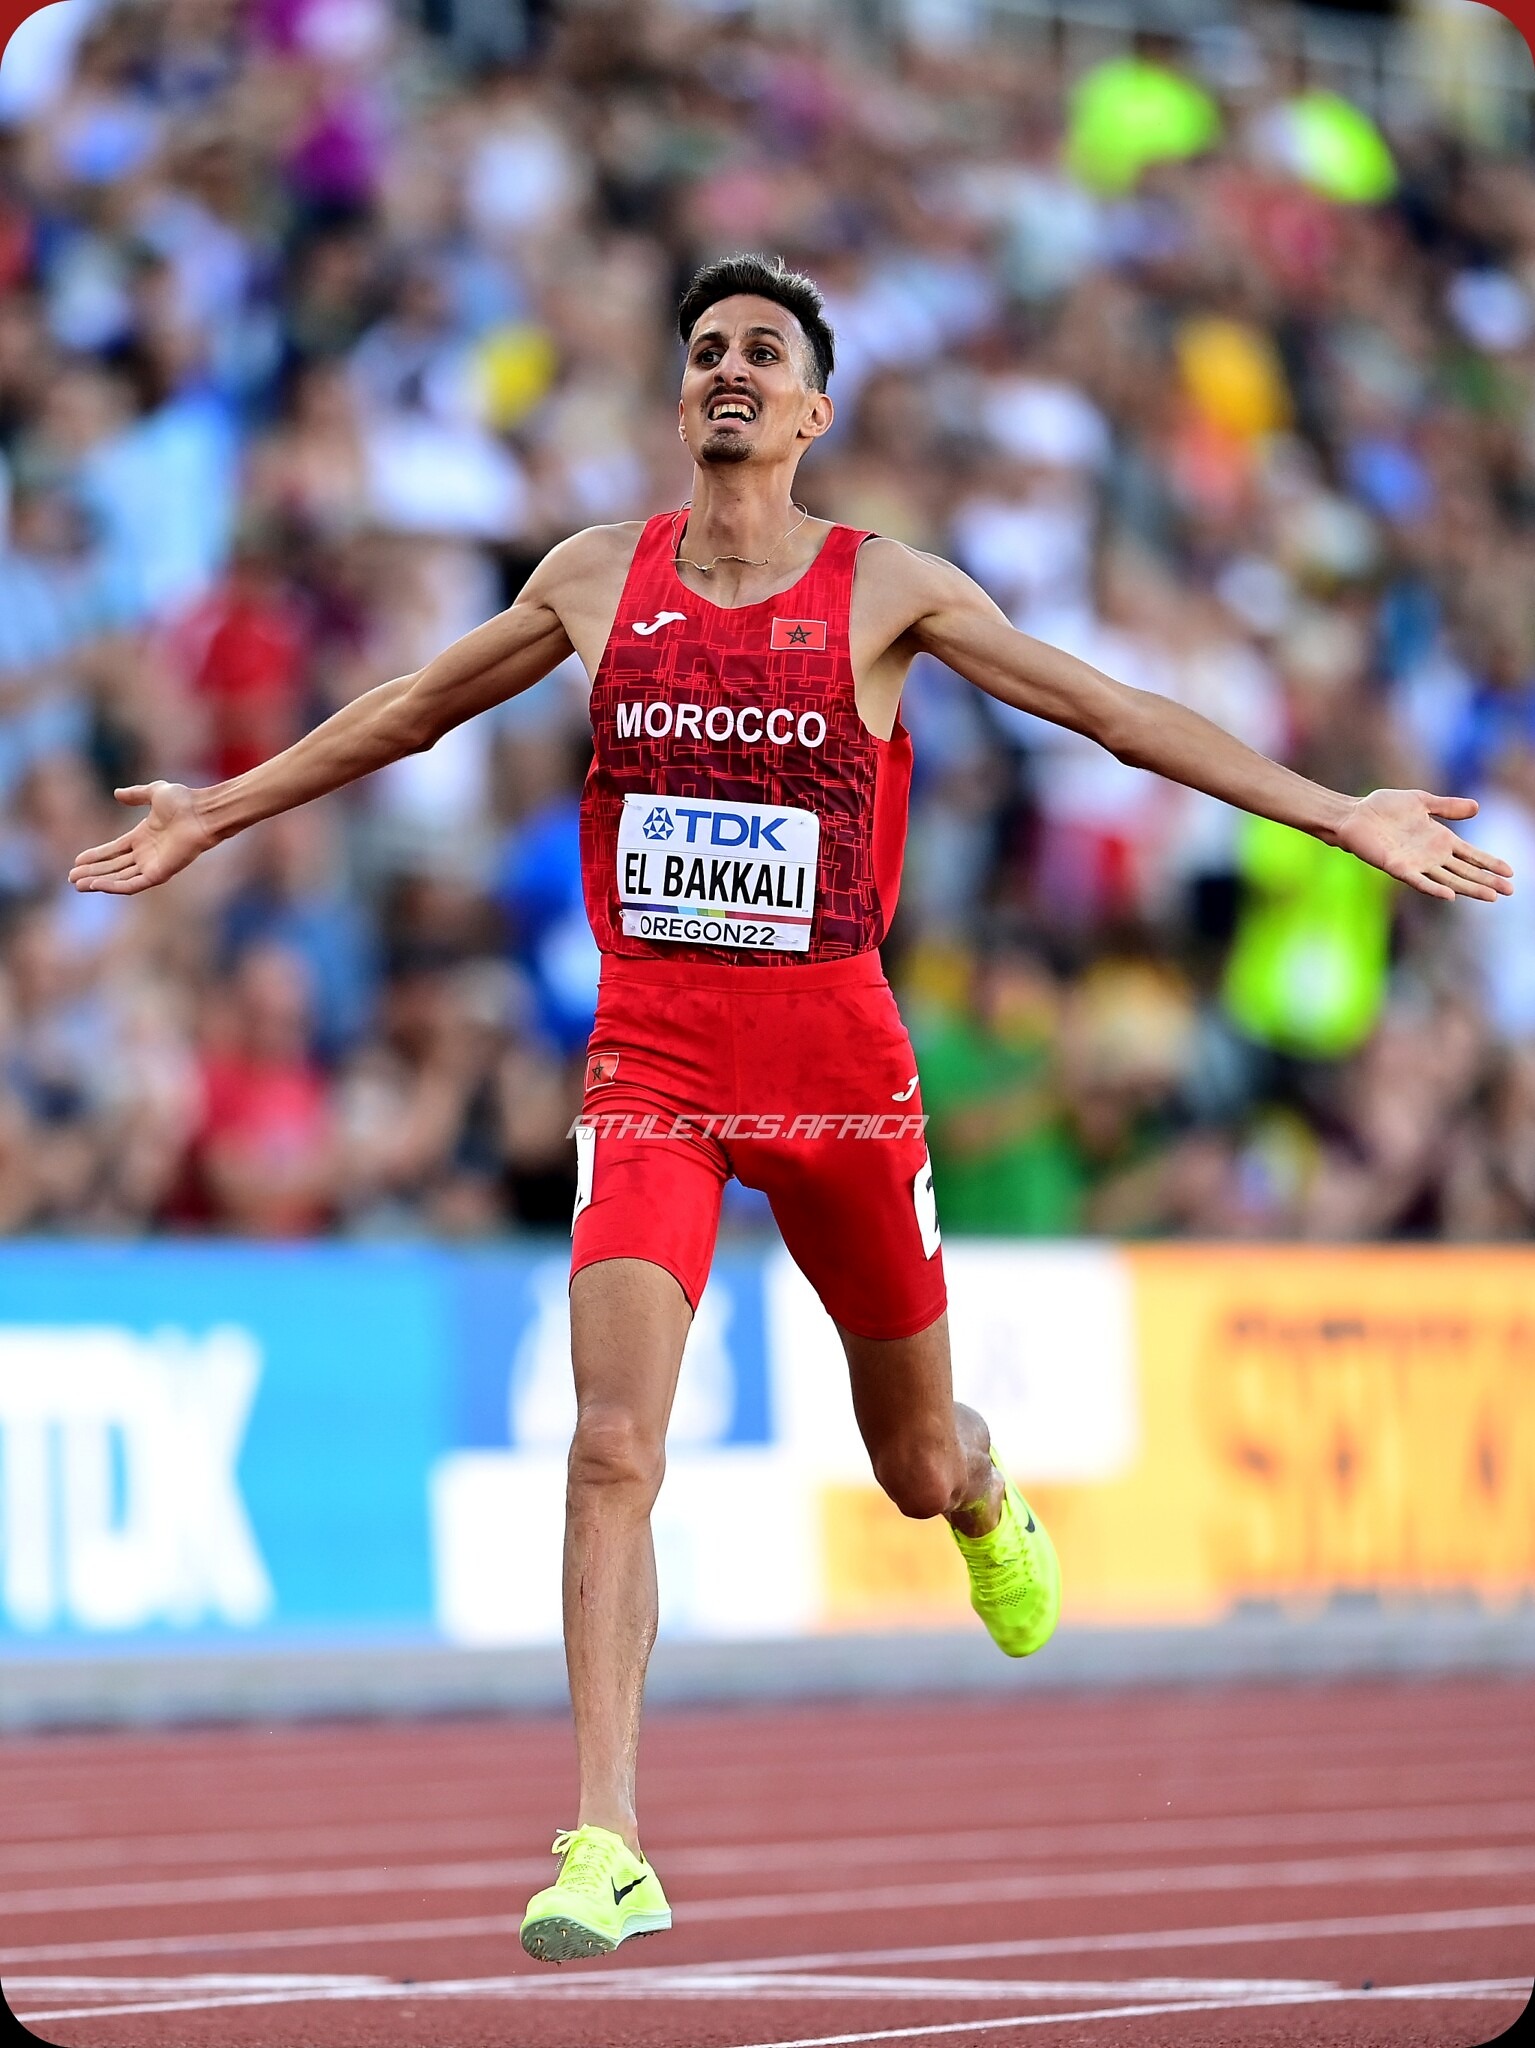 EUGENE, OREGON - JULY 18: Soufiane El Bakkali of Team Morocco reacts after competing in the Men's 3000m Steeplechase on day four of the World Athletics Championships Oregon22 at Hayward Field on July 18, 2022 in Eugene, Oregon. (Photo by Hannah Peters/Getty Images for World Athletics)